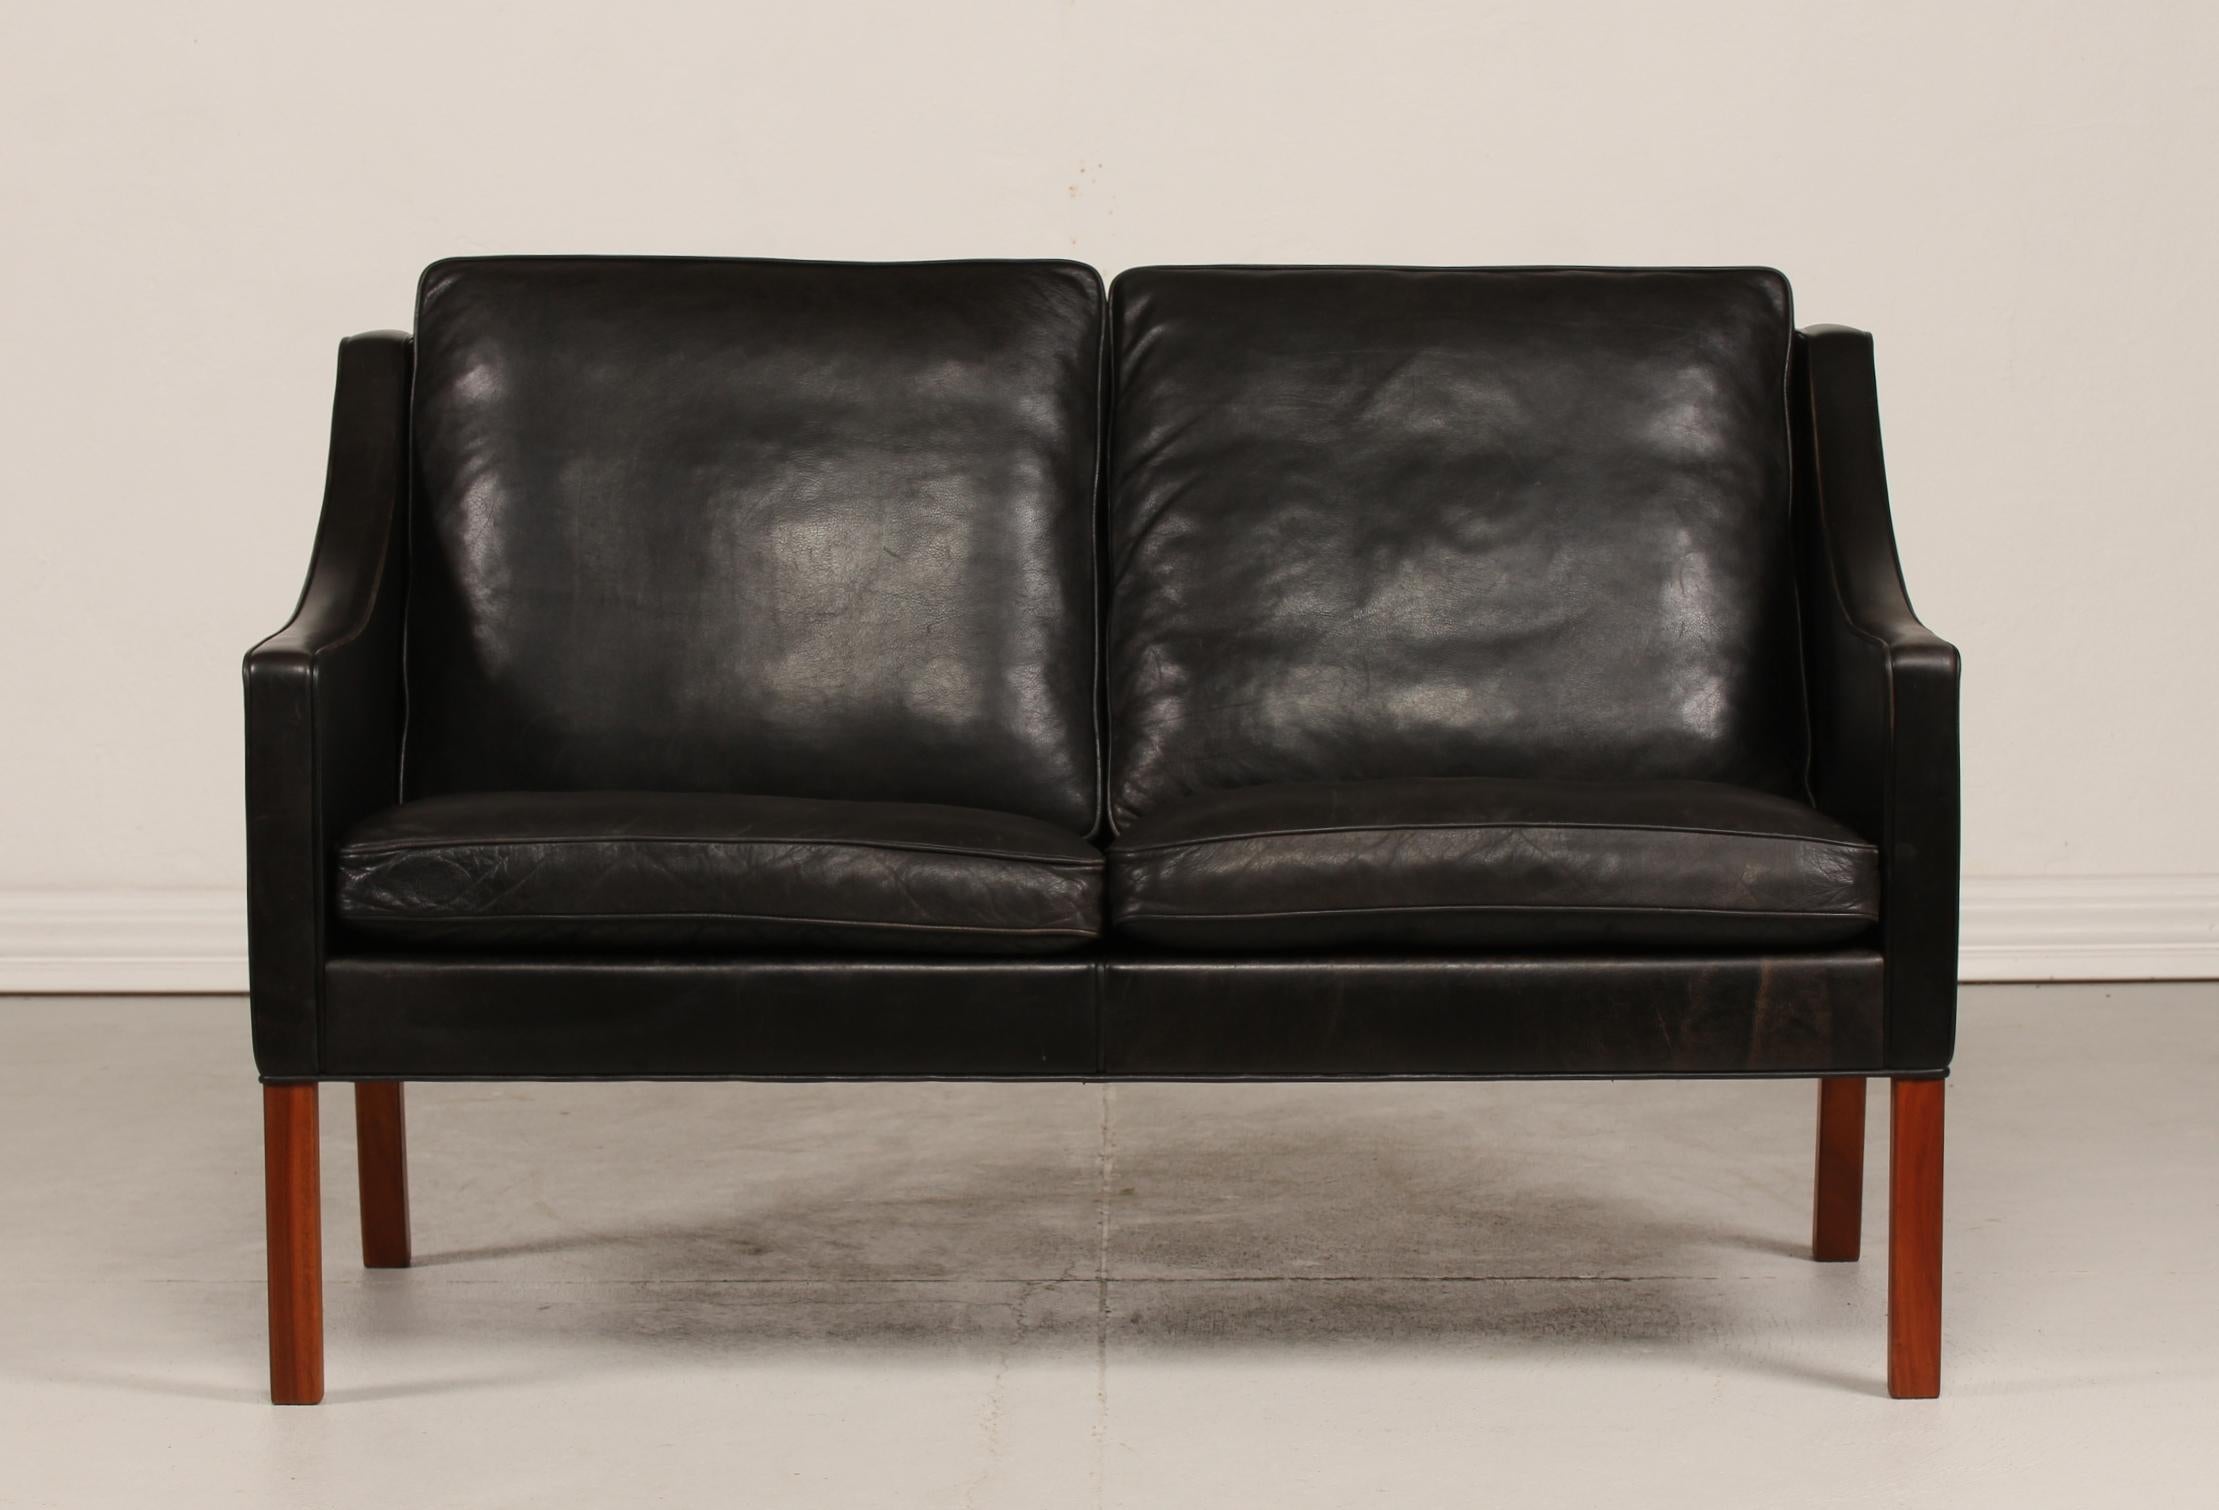 Danish vintage Børge Mogensen (1914-1972) sofa for 2 persons model no. 2208.
It's upholstered with the original black leather. The legs are made of mahogany. 
The cushions are filled inside with granules and natural feathers which gives the sofa a